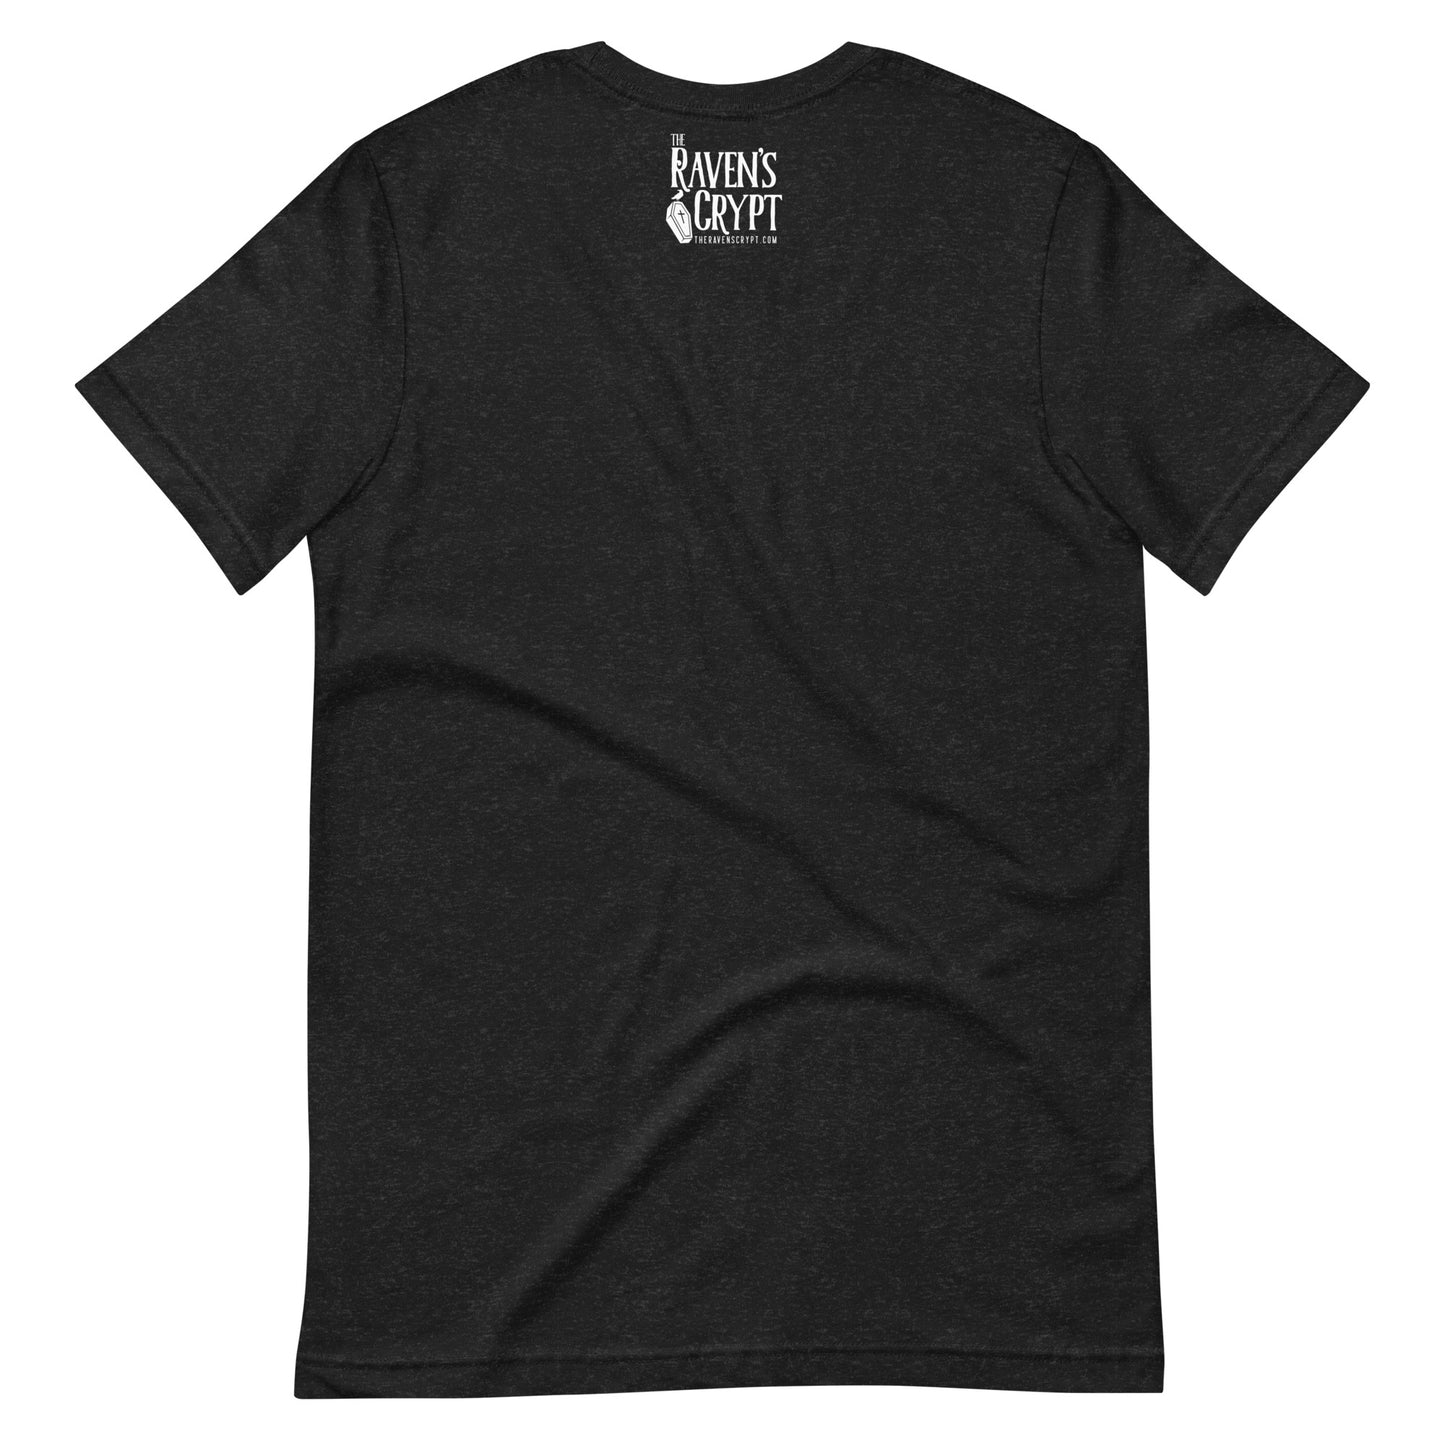 Deep Into the Darkness Crypt 2 - Men's t-shirt - Black Heather Back